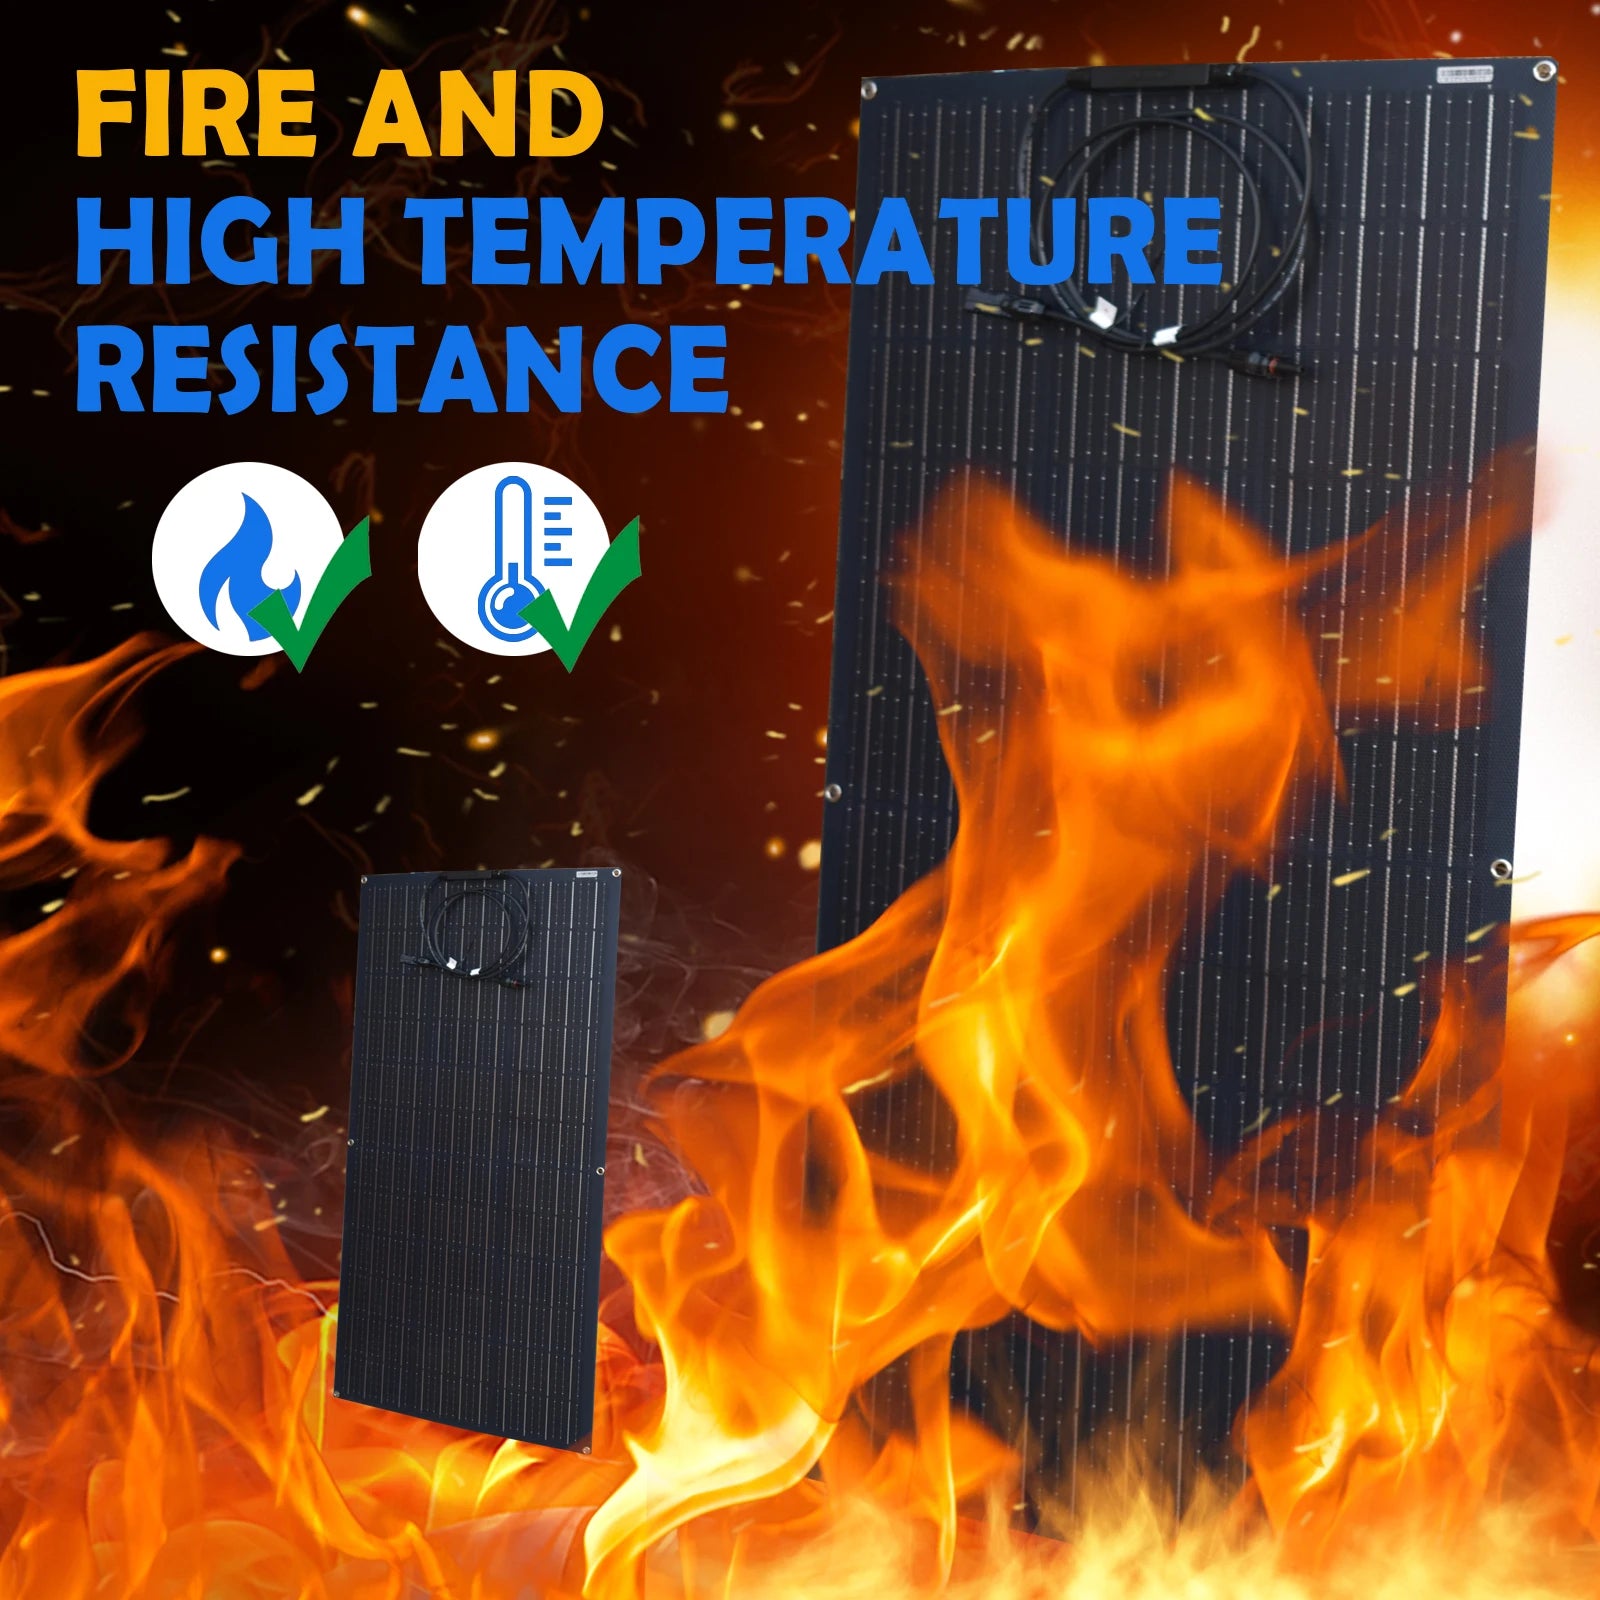 Jingyang Solar Panel, Fire-resistant and high-temperature resistant for safe use in various environments.